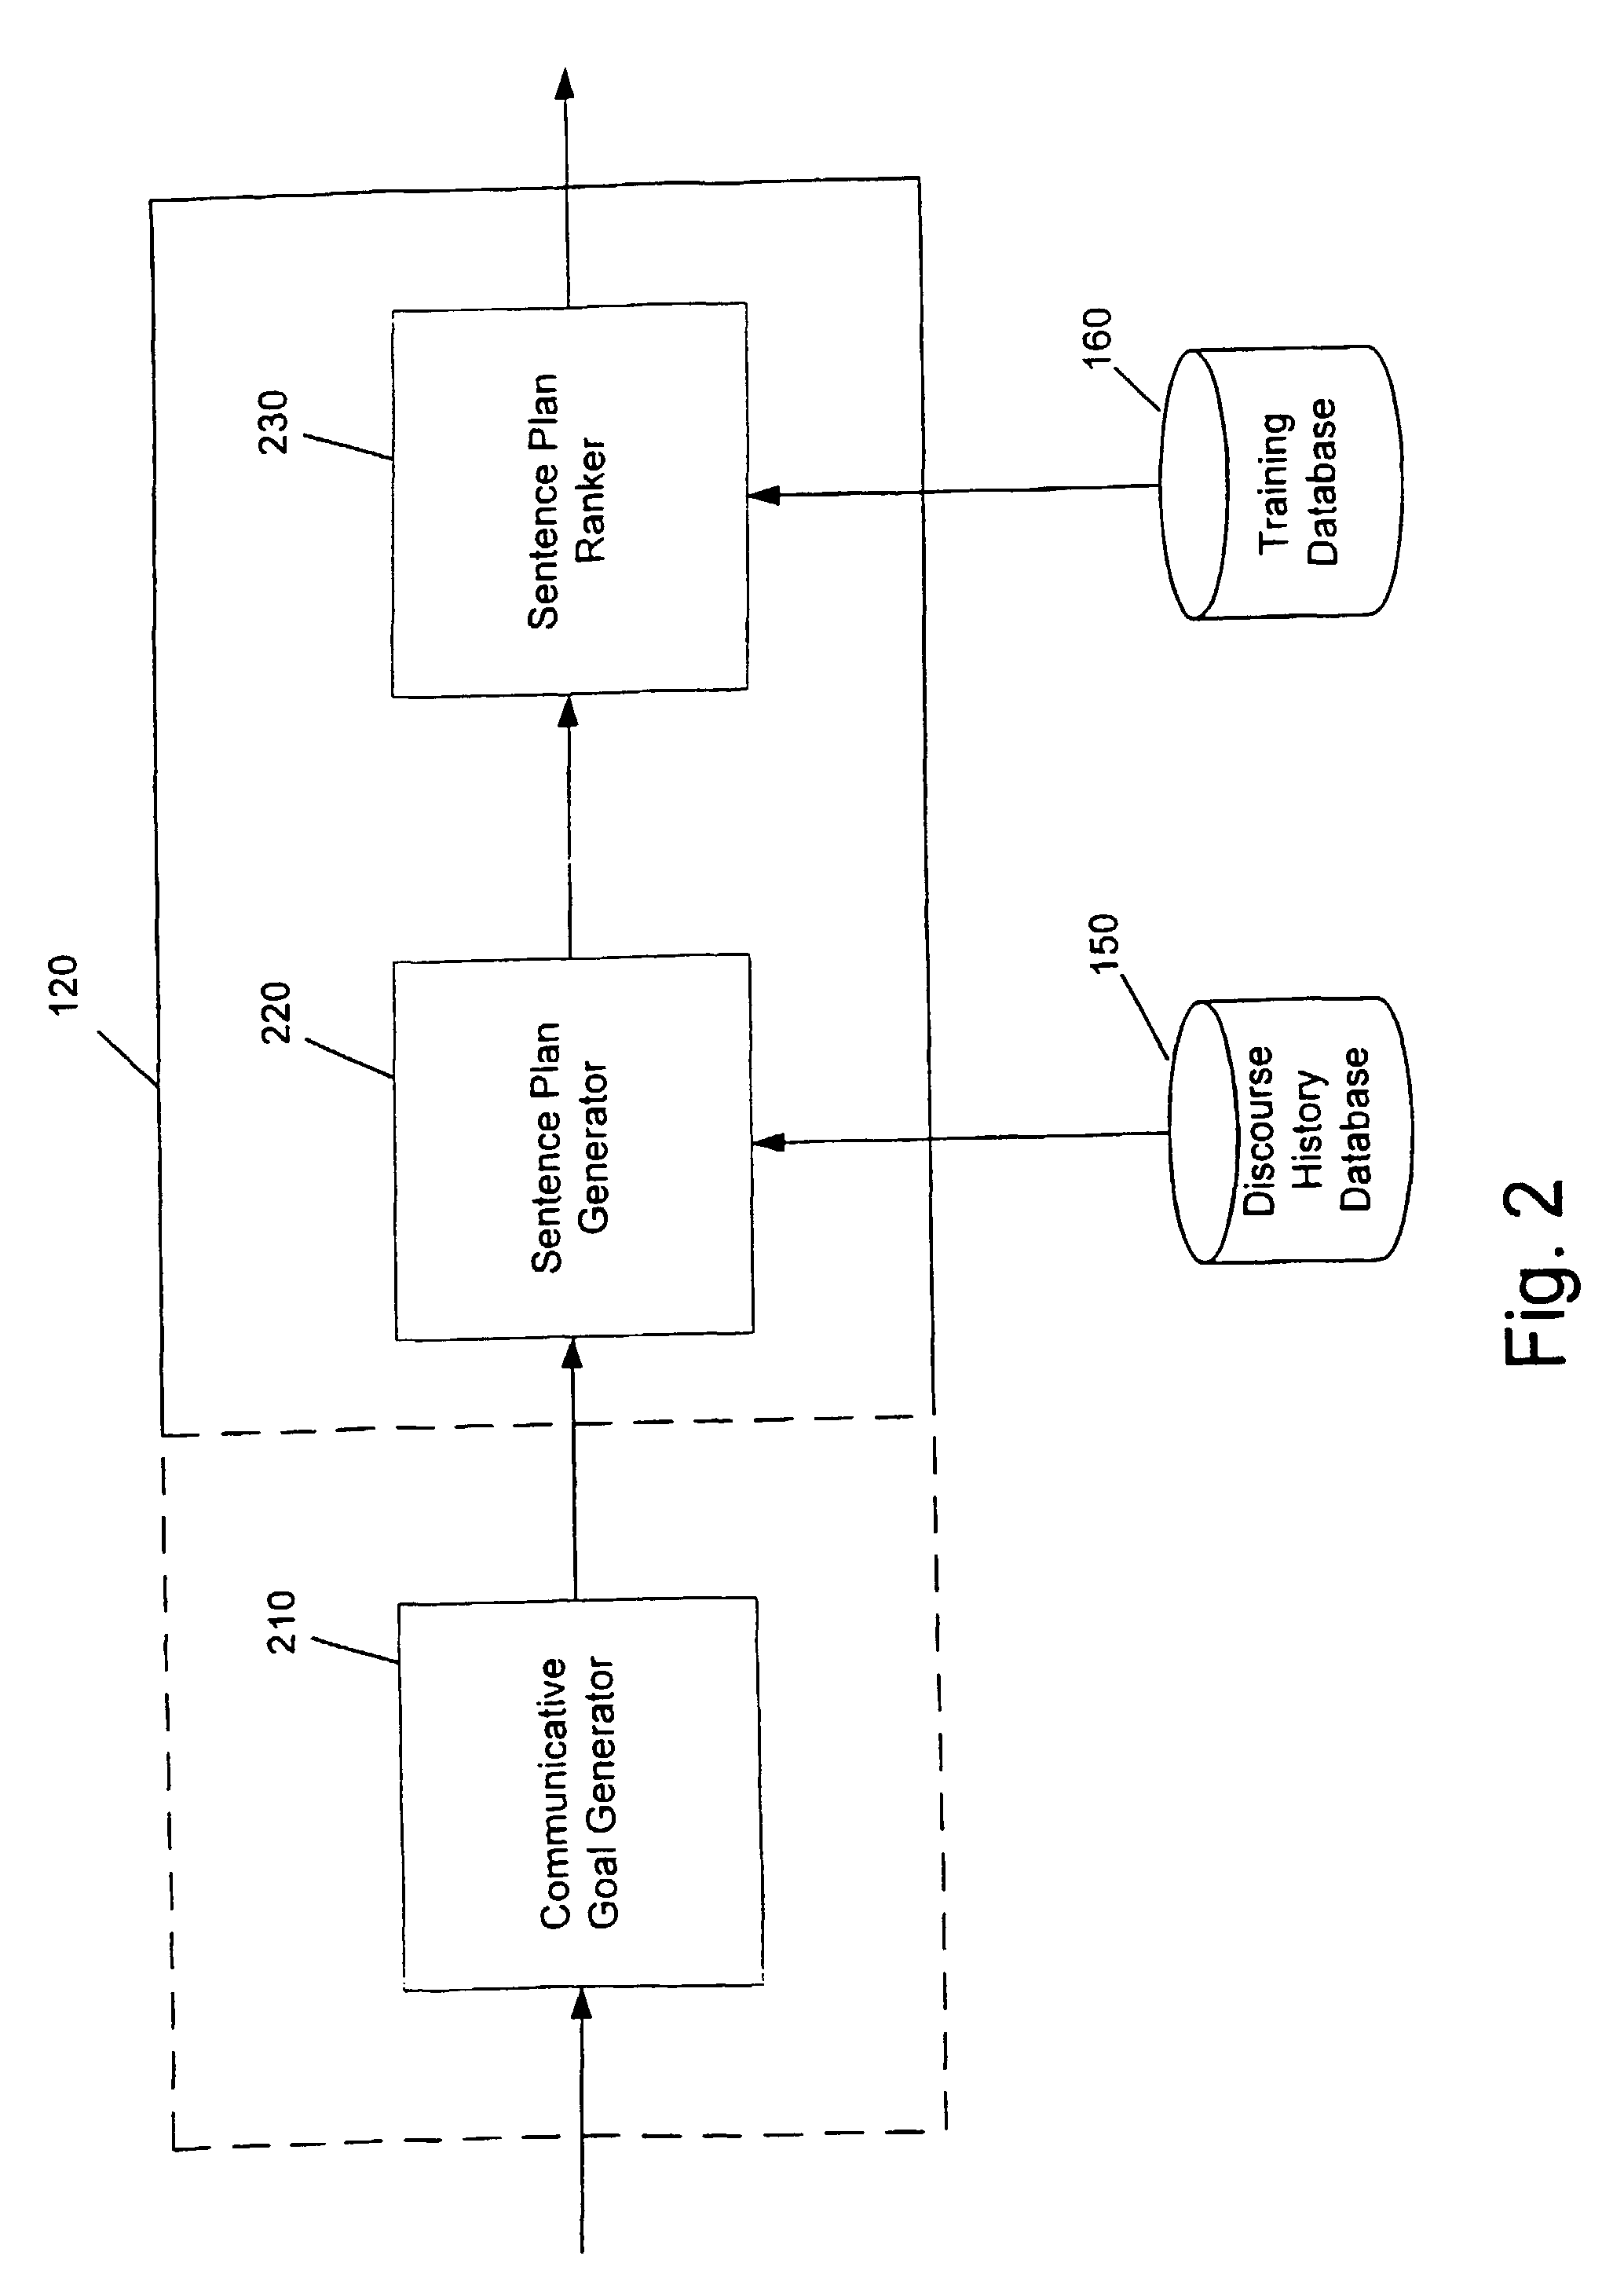 Automated sentence planning in a task classification system